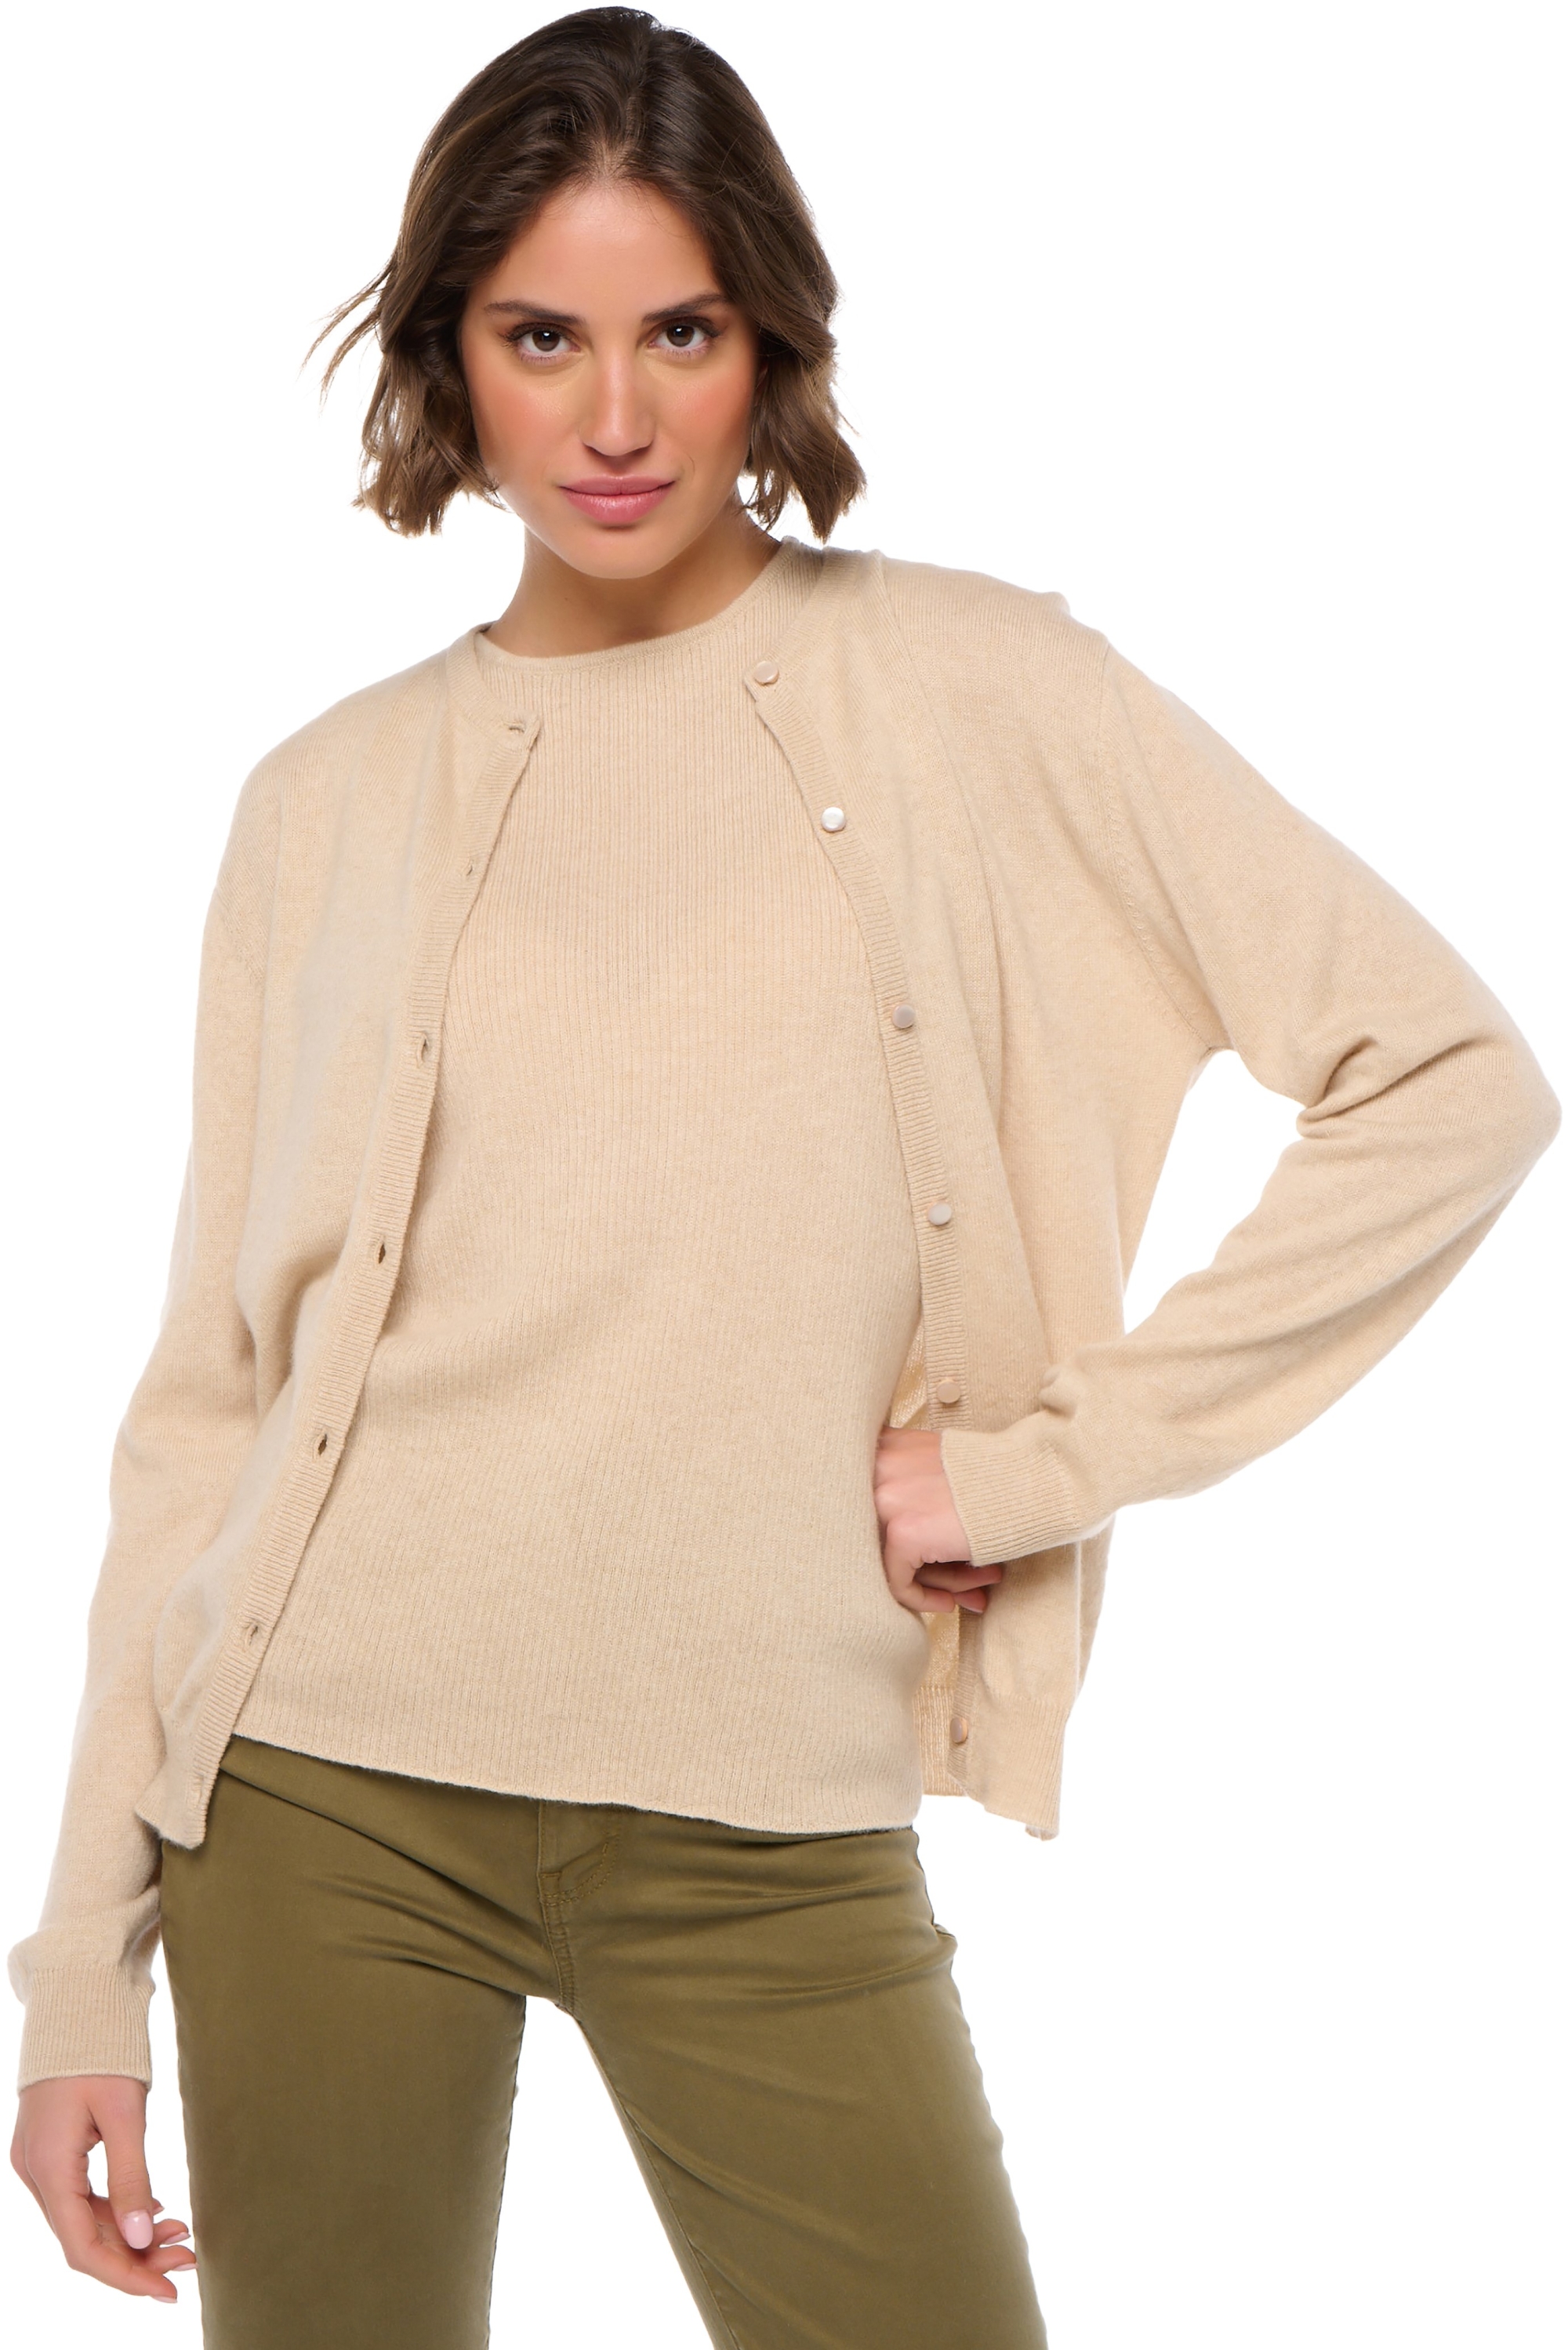 Cachemire pull femme soldes silvia natural beige s